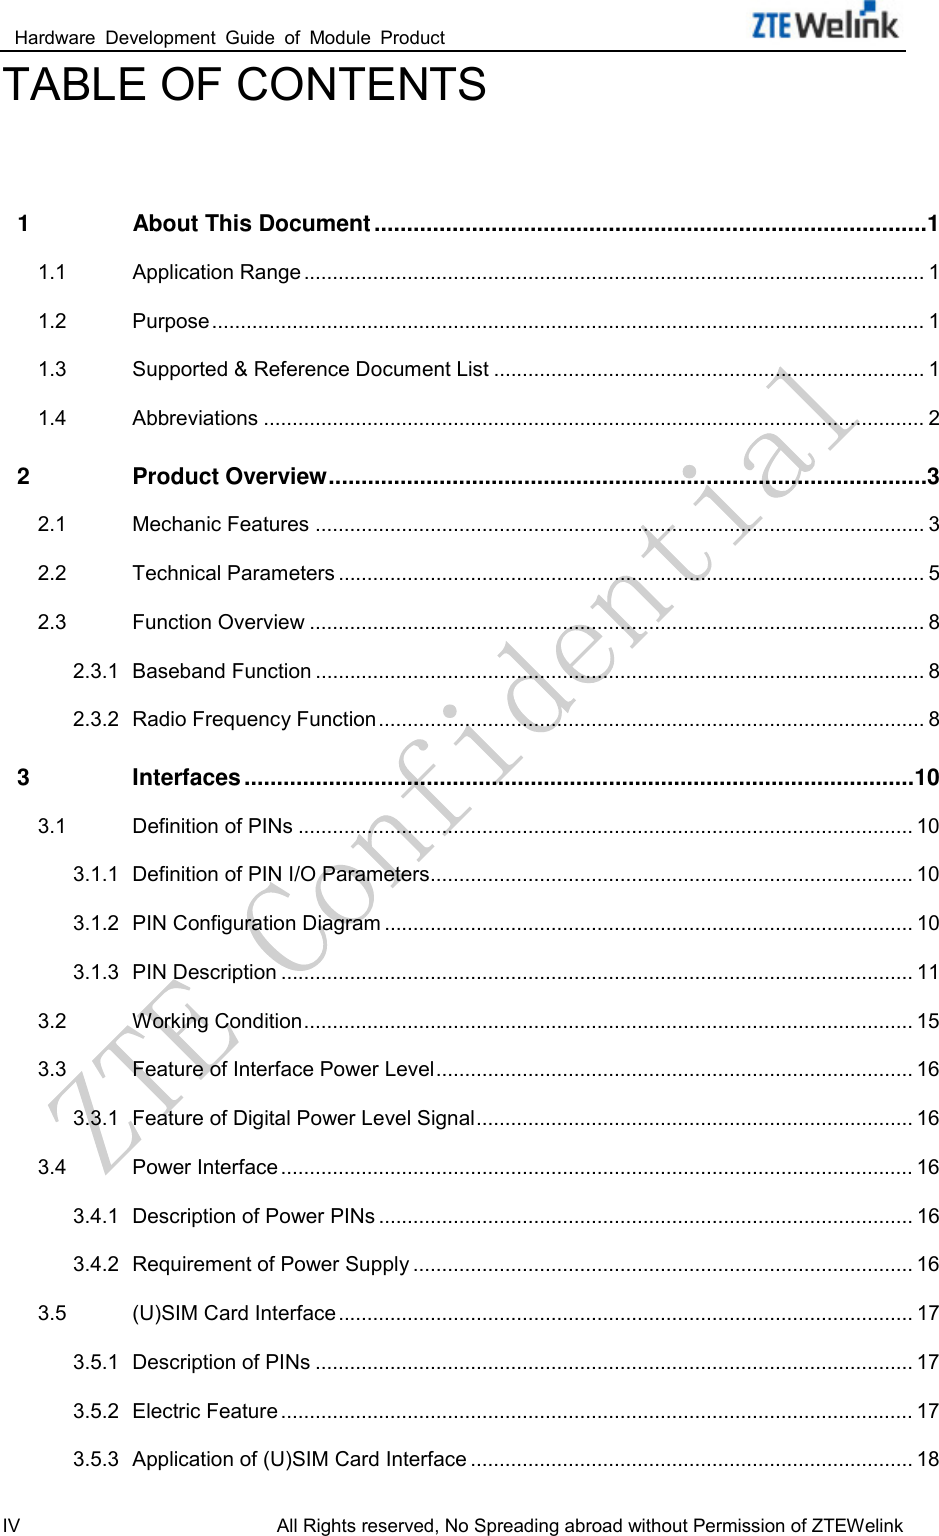  Hardware  Development  Guide  of  Module  Product                                                               IV All Rights reserved, No Spreading abroad without Permission of ZTEWelink TABLE OF CONTENTS  1 About This Document ..................................................................................... 1 1.1 Application Range ............................................................................................................ 1 1.2 Purpose ............................................................................................................................ 1 1.3 Supported &amp; Reference Document List ........................................................................... 1 1.4 Abbreviations ................................................................................................................... 2 2 Product Overview ............................................................................................ 3 2.1 Mechanic Features .......................................................................................................... 3 2.2 Technical Parameters ...................................................................................................... 5 2.3 Function Overview ........................................................................................................... 8 2.3.1 Baseband Function .......................................................................................................... 8 2.3.2 Radio Frequency Function ............................................................................................... 8 3 Interfaces ....................................................................................................... 10 3.1 Definition of PINs ........................................................................................................... 10 3.1.1 Definition of PIN I/O Parameters .................................................................................... 10 3.1.2 PIN Configuration Diagram ............................................................................................ 10 3.1.3 PIN Description .............................................................................................................. 11 3.2 Working Condition .......................................................................................................... 15 3.3 Feature of Interface Power Level ................................................................................... 16 3.3.1 Feature of Digital Power Level Signal ............................................................................ 16 3.4 Power Interface .............................................................................................................. 16 3.4.1 Description of Power PINs ............................................................................................. 16 3.4.2 Requirement of Power Supply ....................................................................................... 16 3.5 (U)SIM Card Interface .................................................................................................... 17 3.5.1 Description of PINs ........................................................................................................ 17 3.5.2 Electric Feature .............................................................................................................. 17 3.5.3 Application of (U)SIM Card Interface ............................................................................. 18 